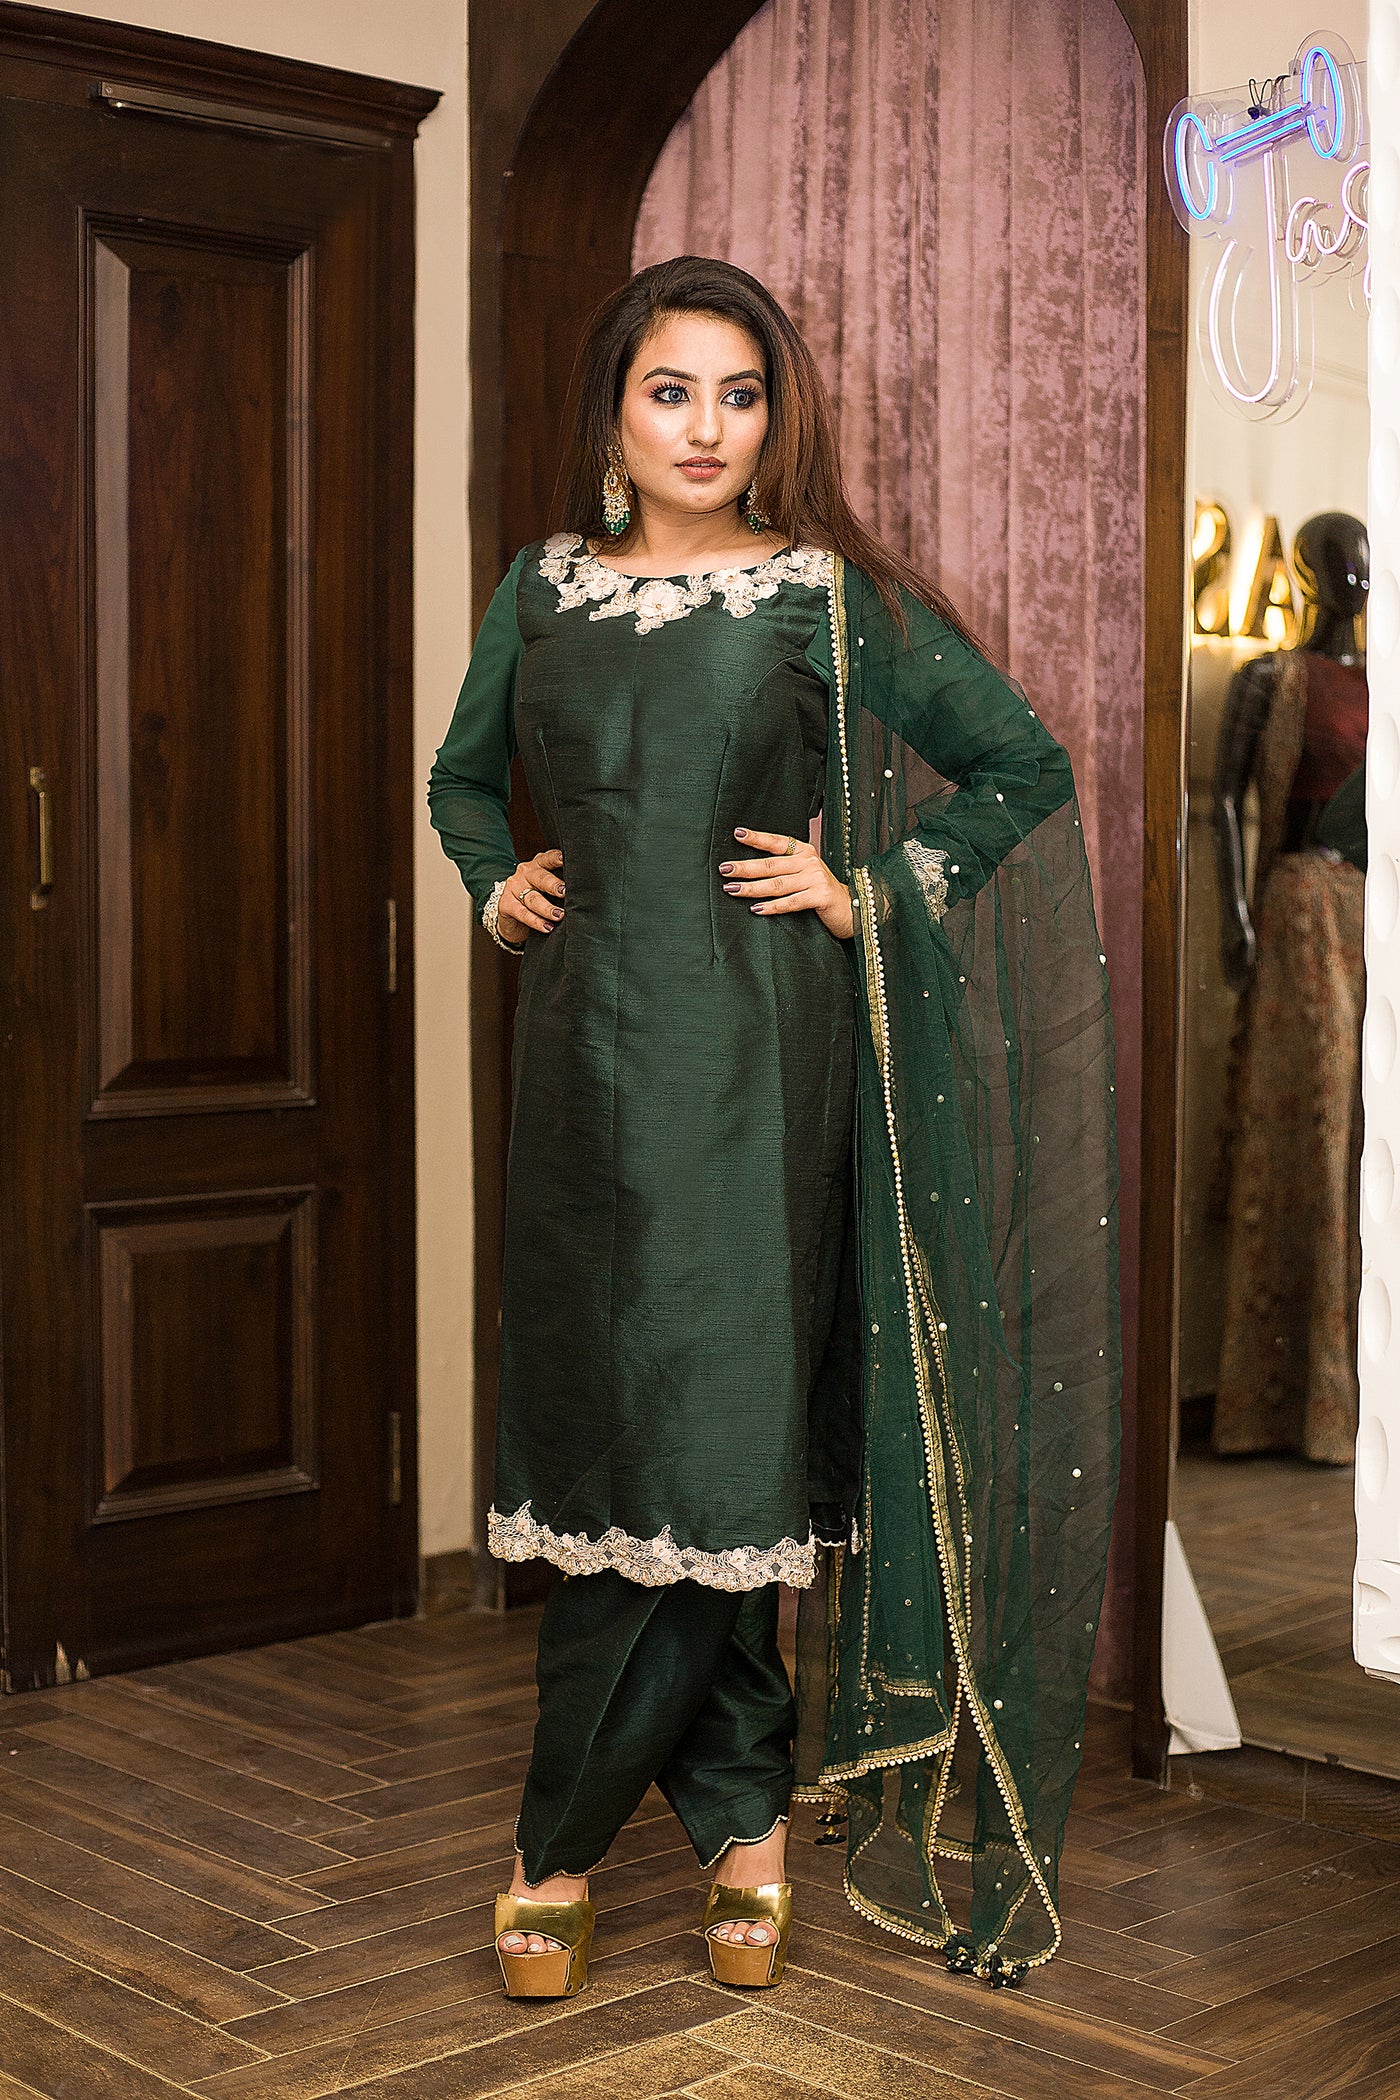 Forest Green Embroidered Salwar Suit Indian Clothing in Denver, CO, Aurora, CO, Boulder, CO, Fort Collins, CO, Colorado Springs, CO, Parker, CO, Highlands Ranch, CO, Cherry Creek, CO, Centennial, CO, and Longmont, CO. NATIONWIDE SHIPPING USA- India Fashion X